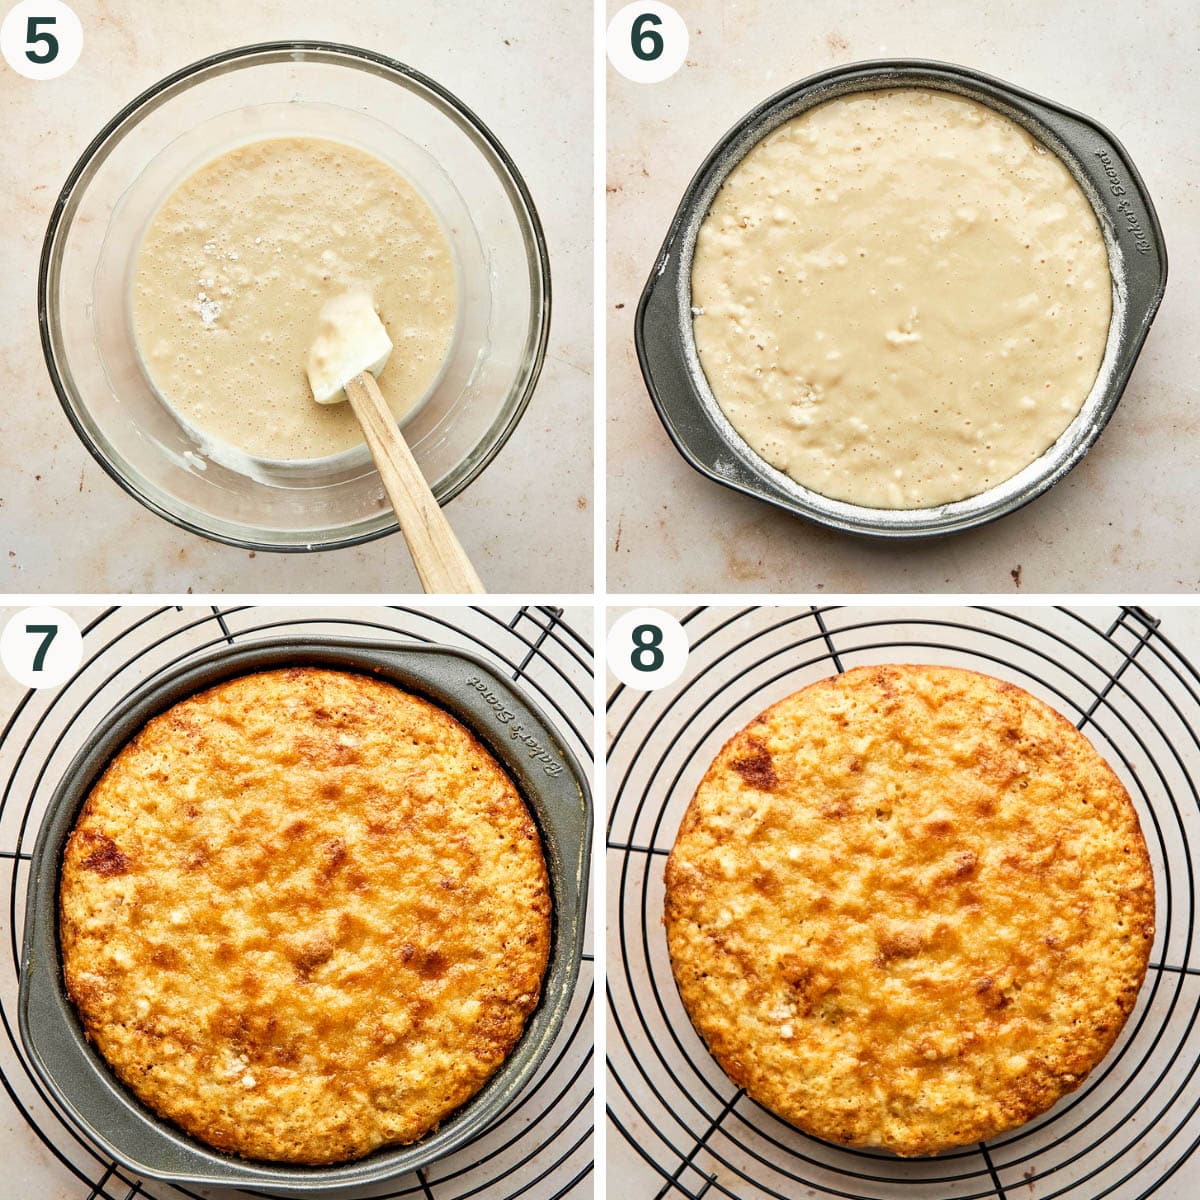 Vanilla cake steps 1 to 4, finished batter and before and after baking.